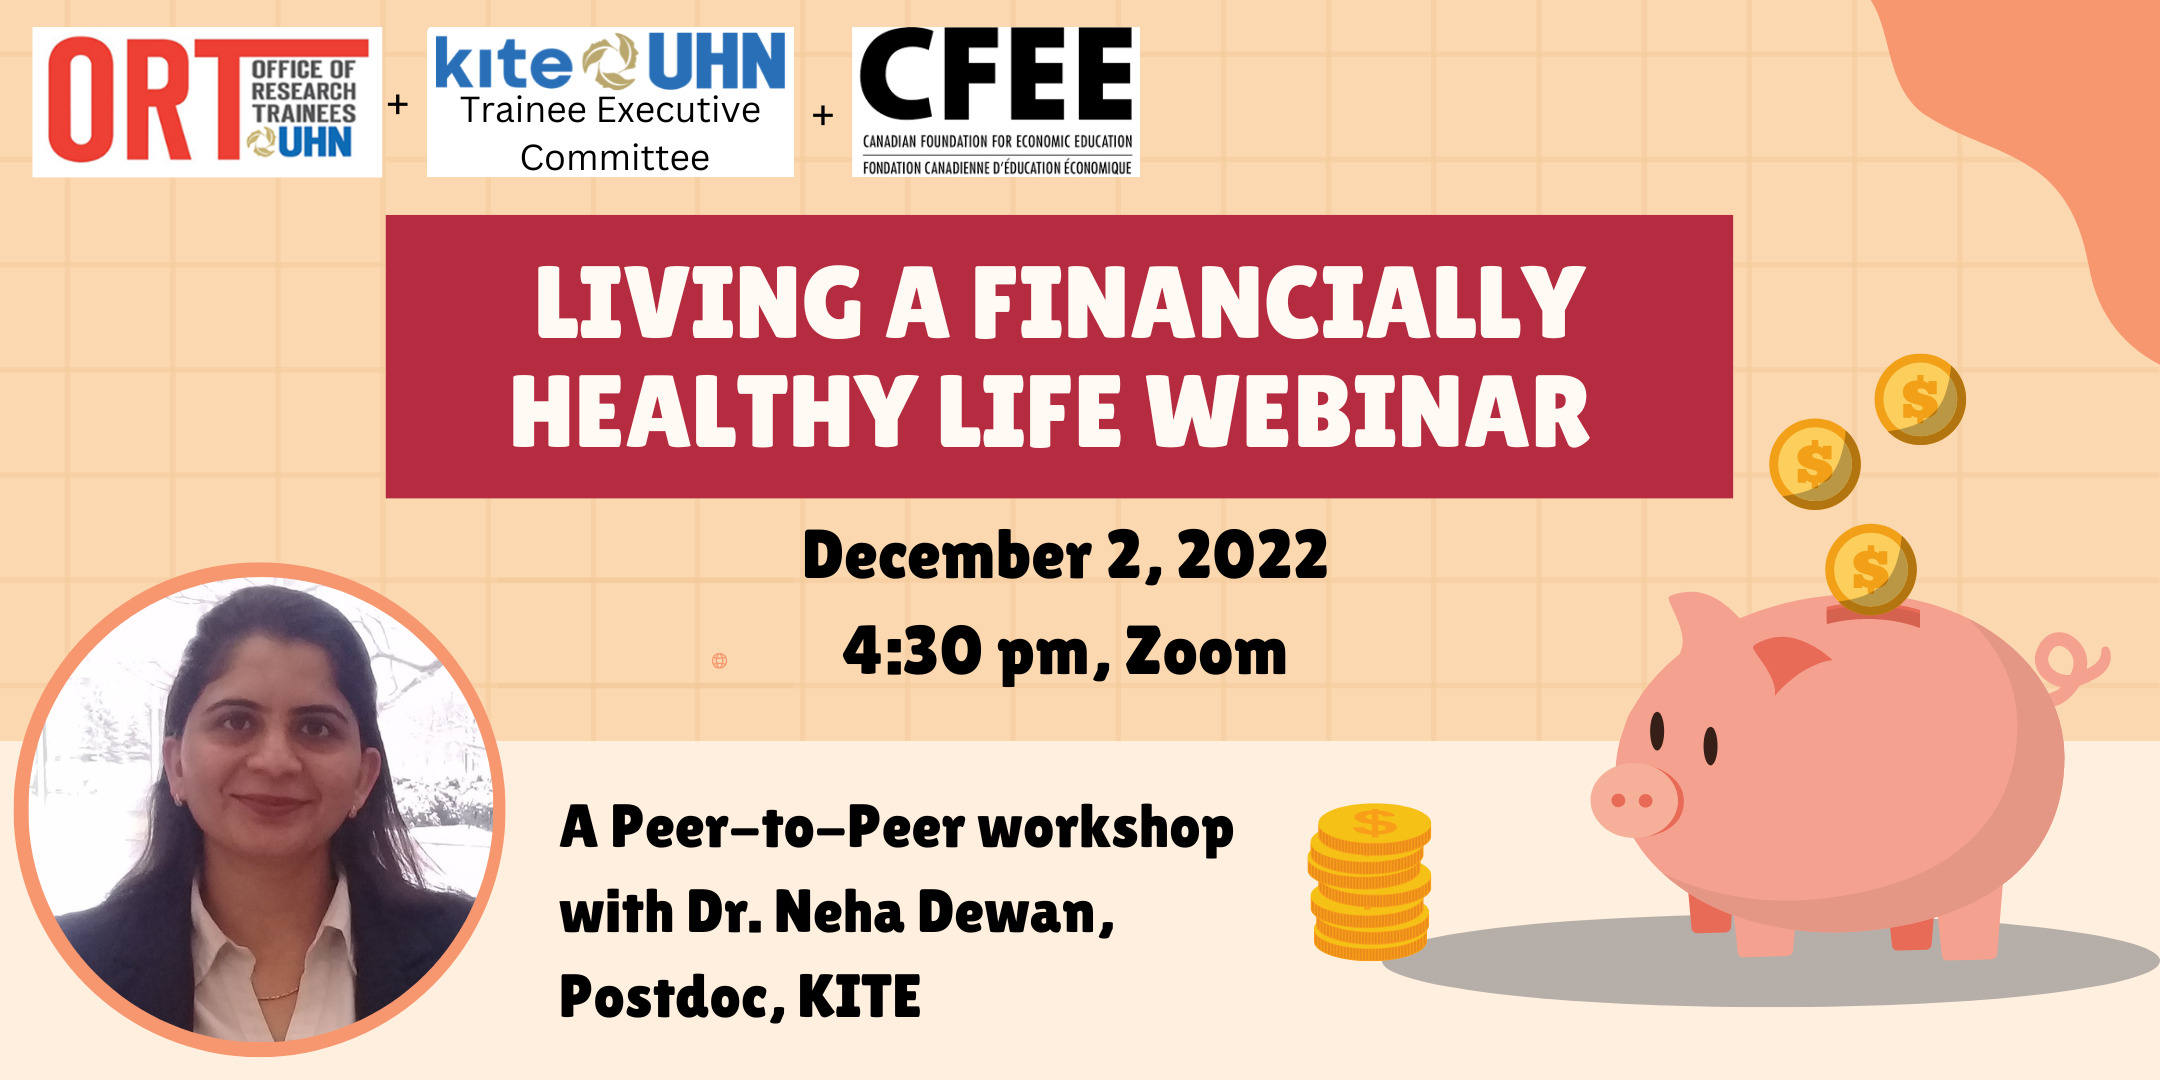 Peach poster - living a financially healthy life webinar. The Logos for the ORT, KITE at UHN trainee Executive Committee and the Canadian Foundation for Economic Education are seen on the top left. December 2, 2022, 4:30 pm, Zoom. A peer-to-peer workshop with Dr. Neha Dewan, postdoc, KITE